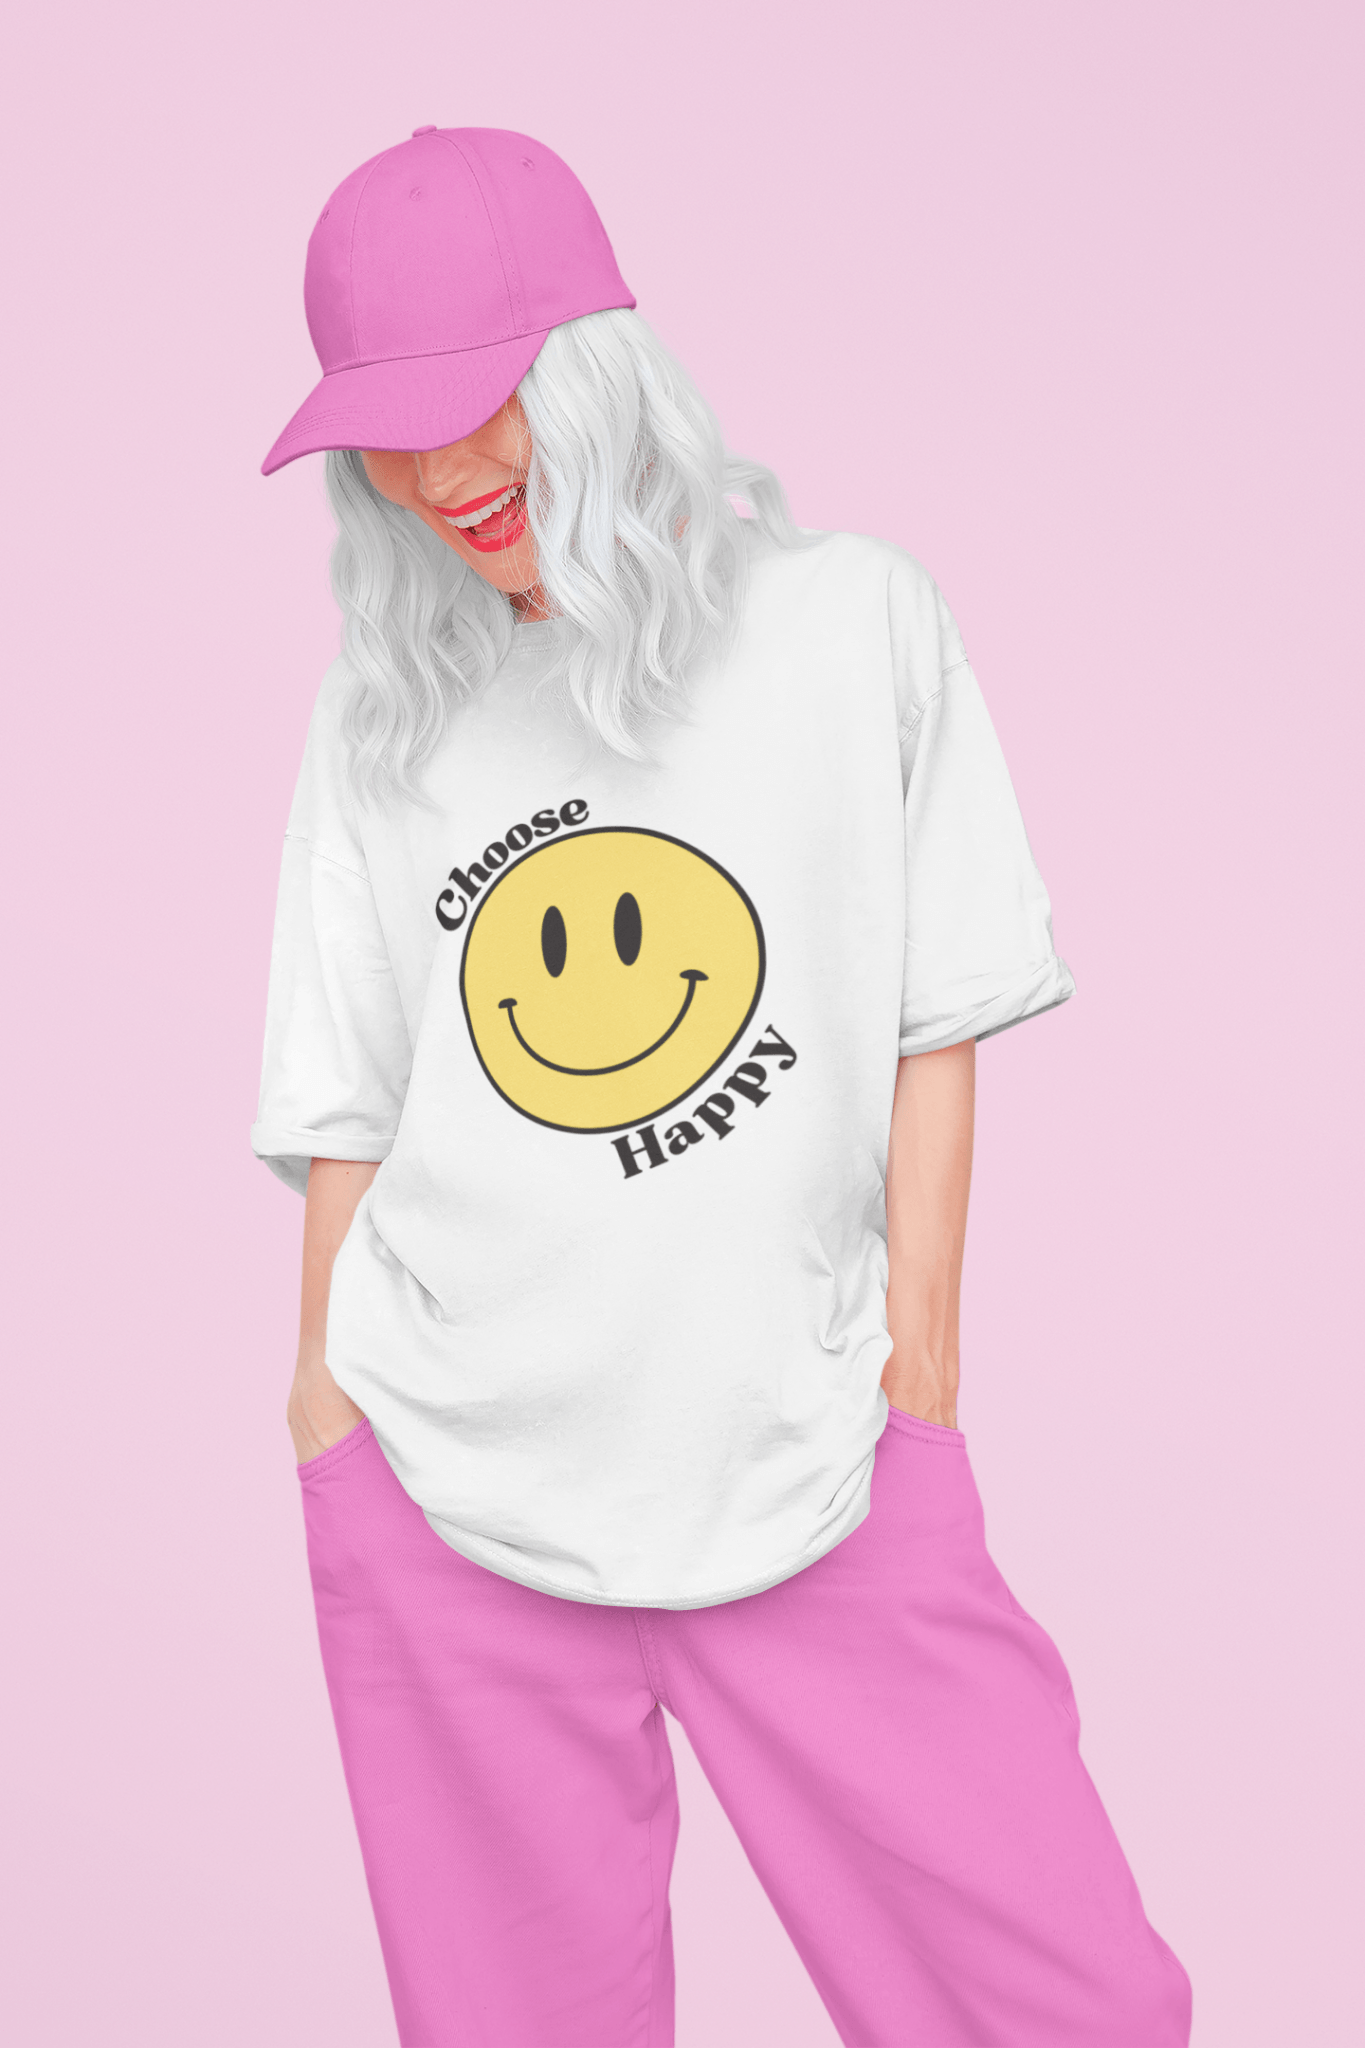 Choose Happy Smiley Face Short-Sleeve Unisex T-Shirt - The Kindness Cause